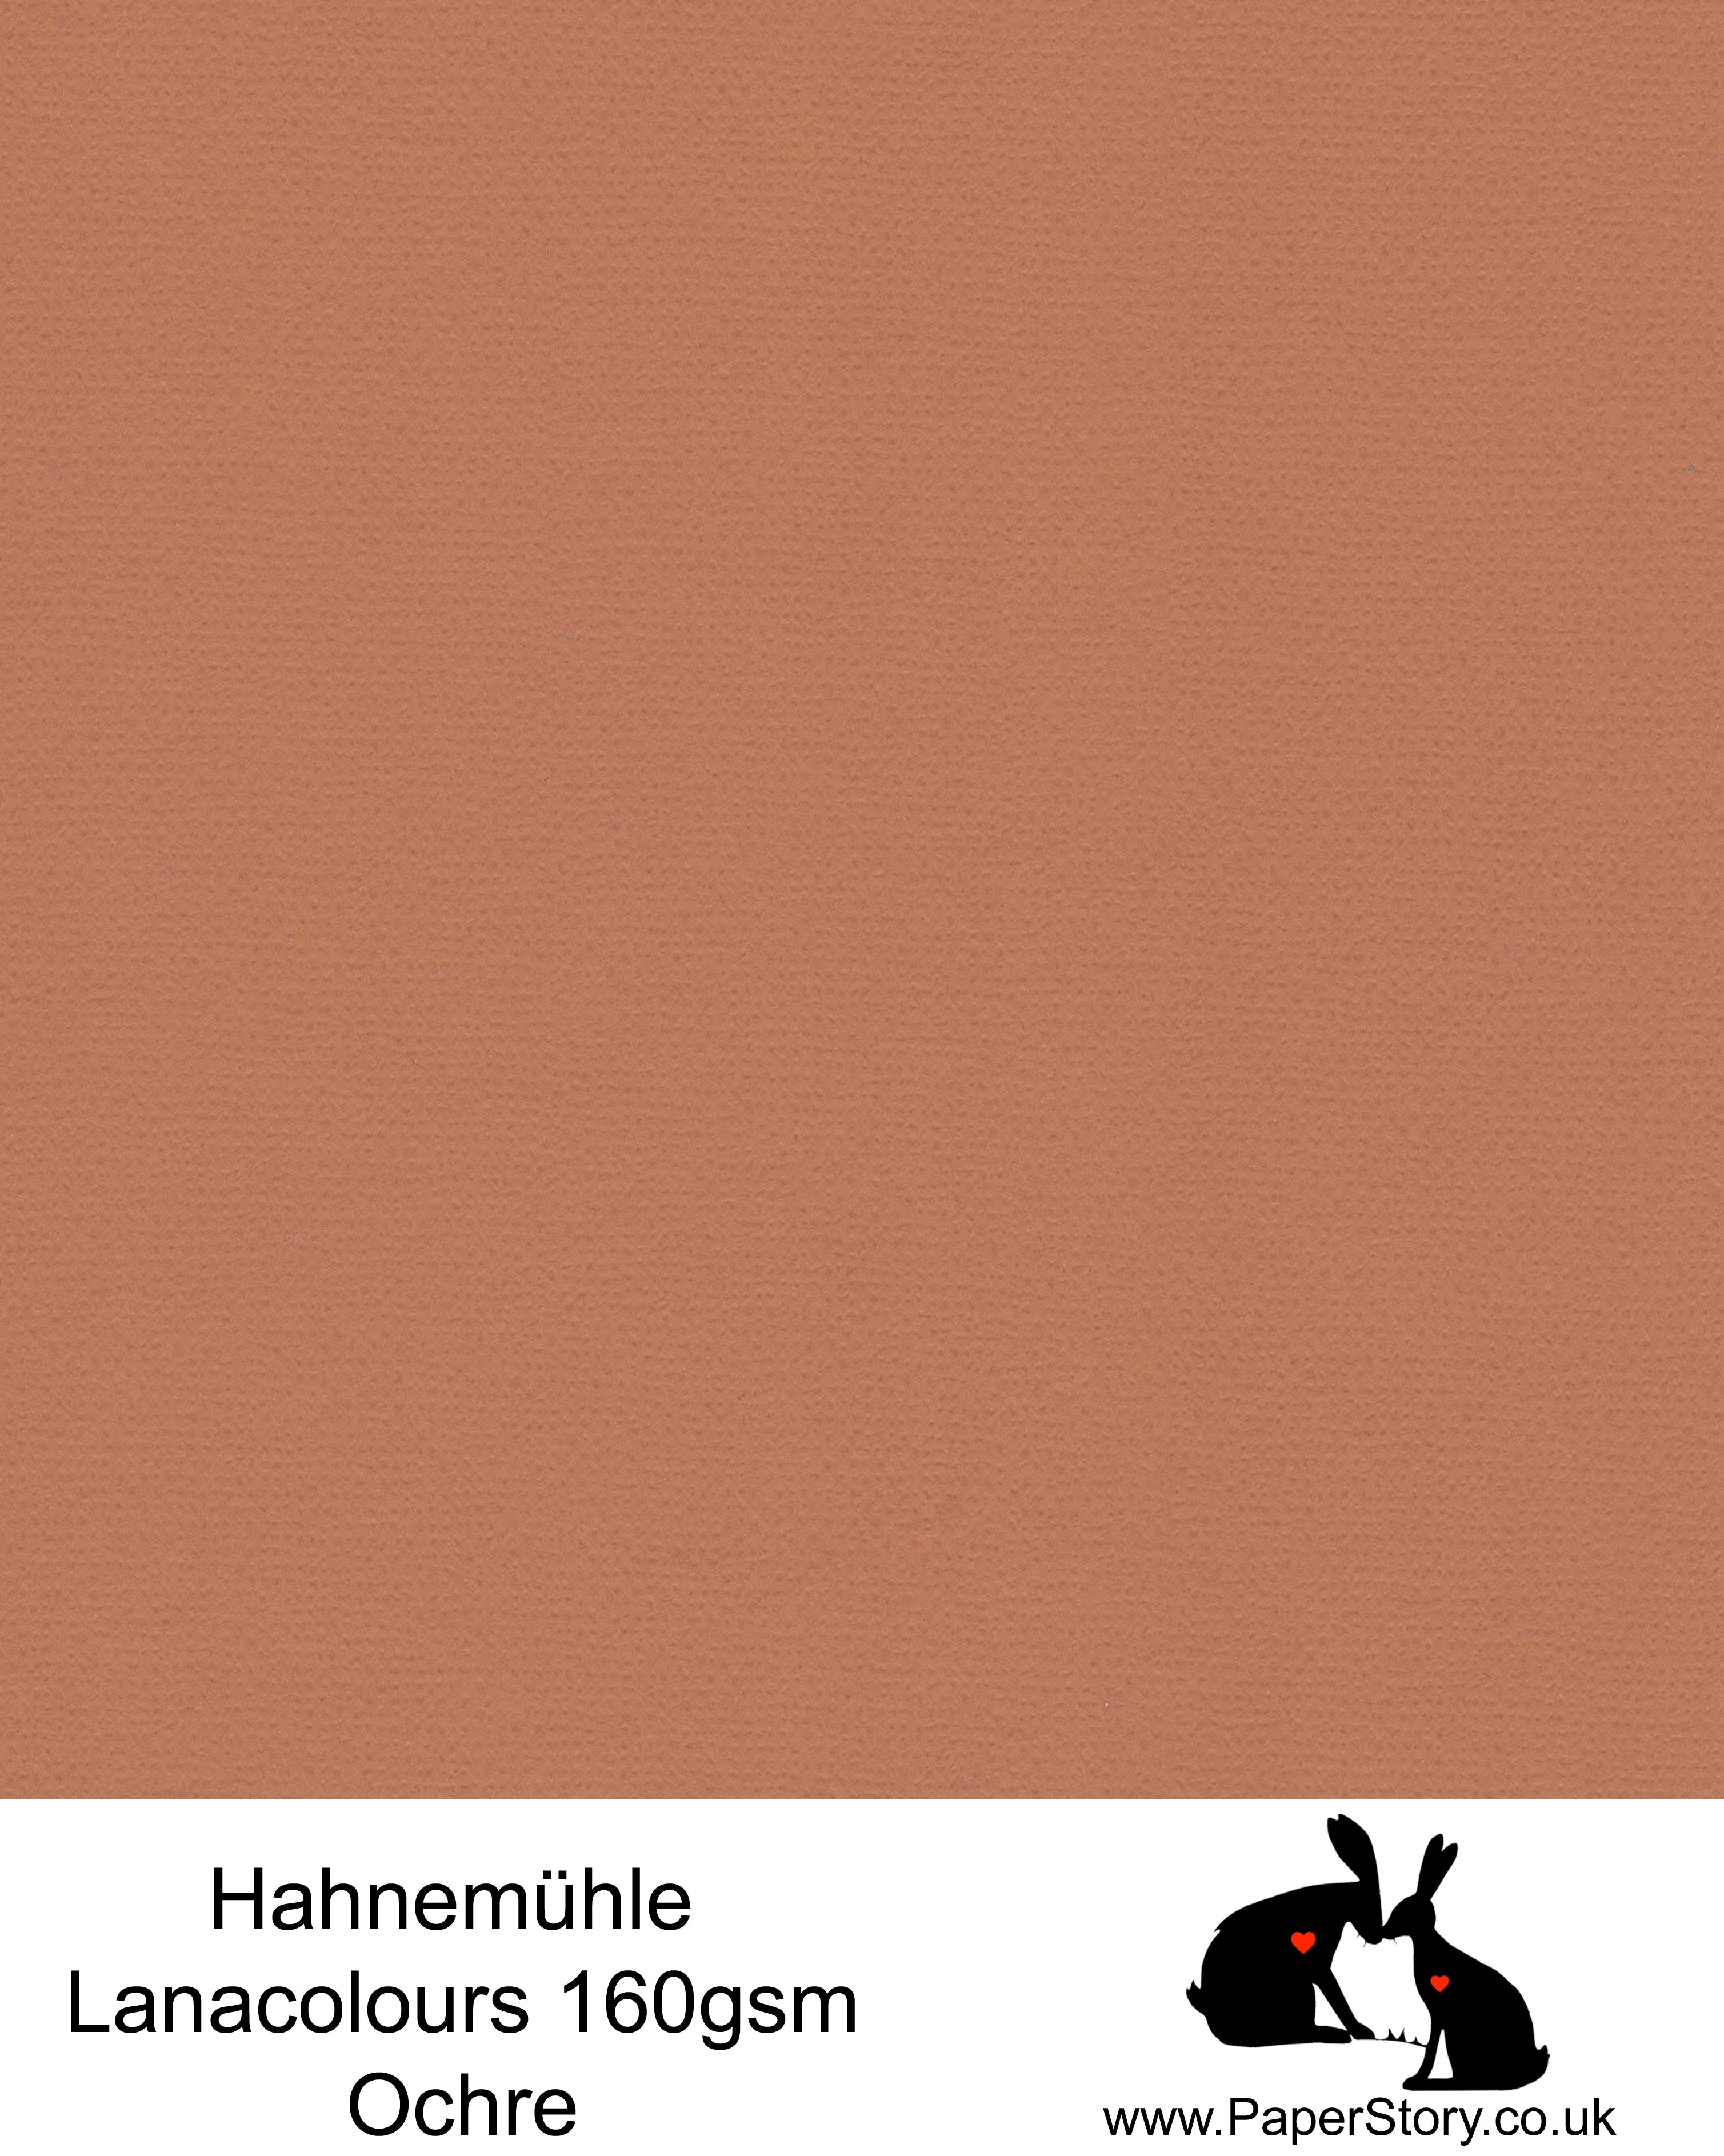 Hahnemühle Lana Colours pastel Ochre, deep brown hammered paper 160 gsm, beautiful warm brown. Artist Premium Pastel and Papercutting Papers 160 gsm often described as hammered paper